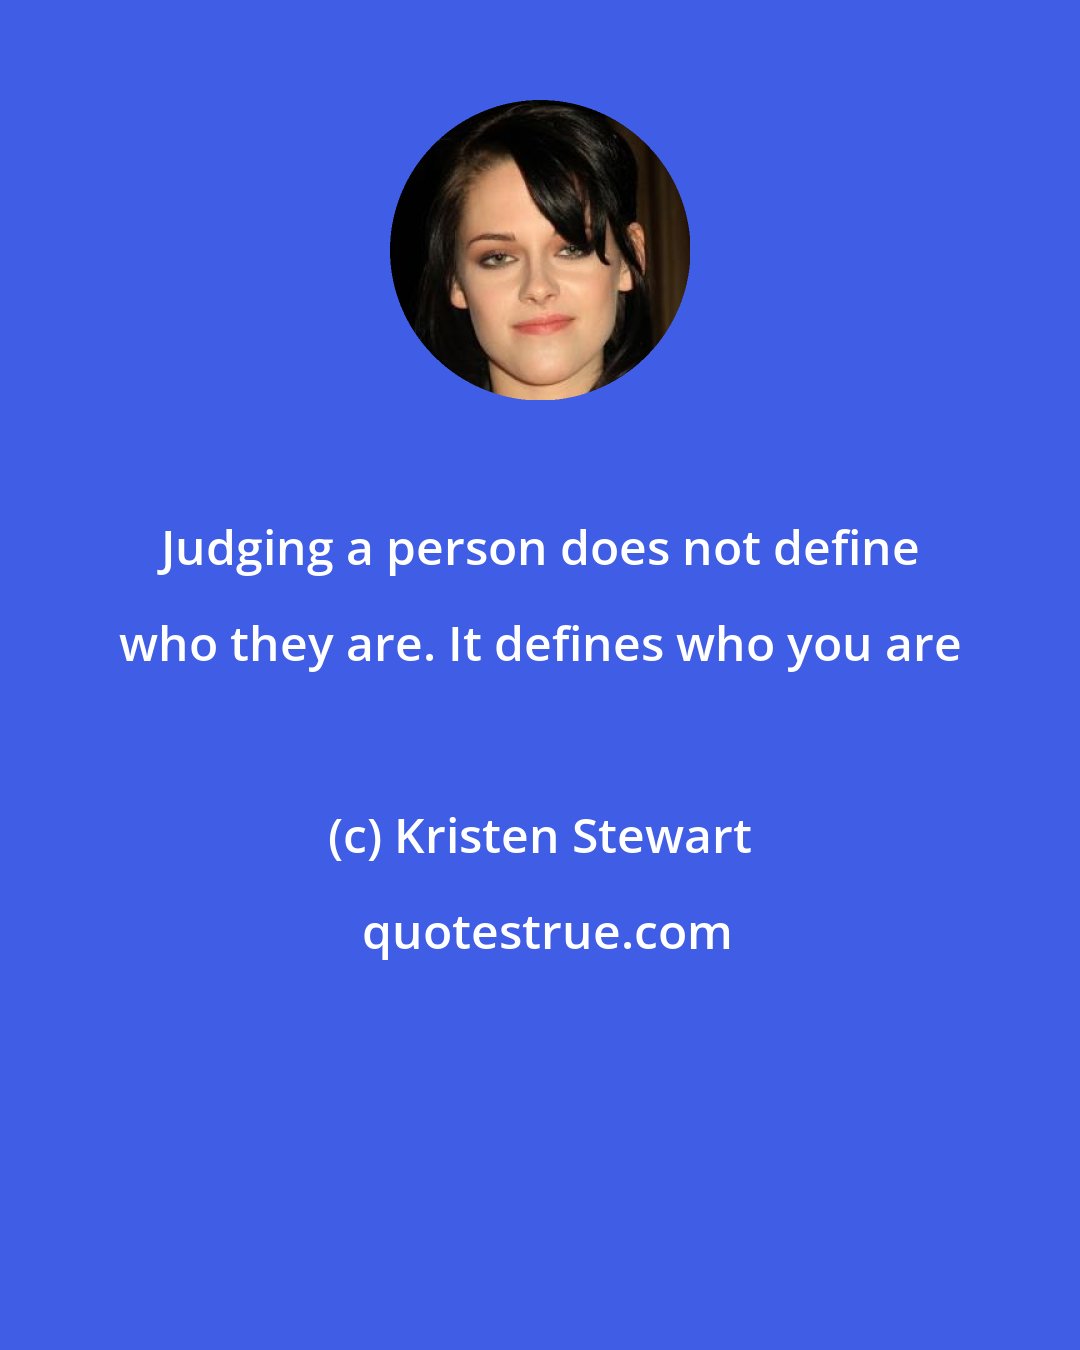 Kristen Stewart: Judging a person does not define who they are. It defines who you are